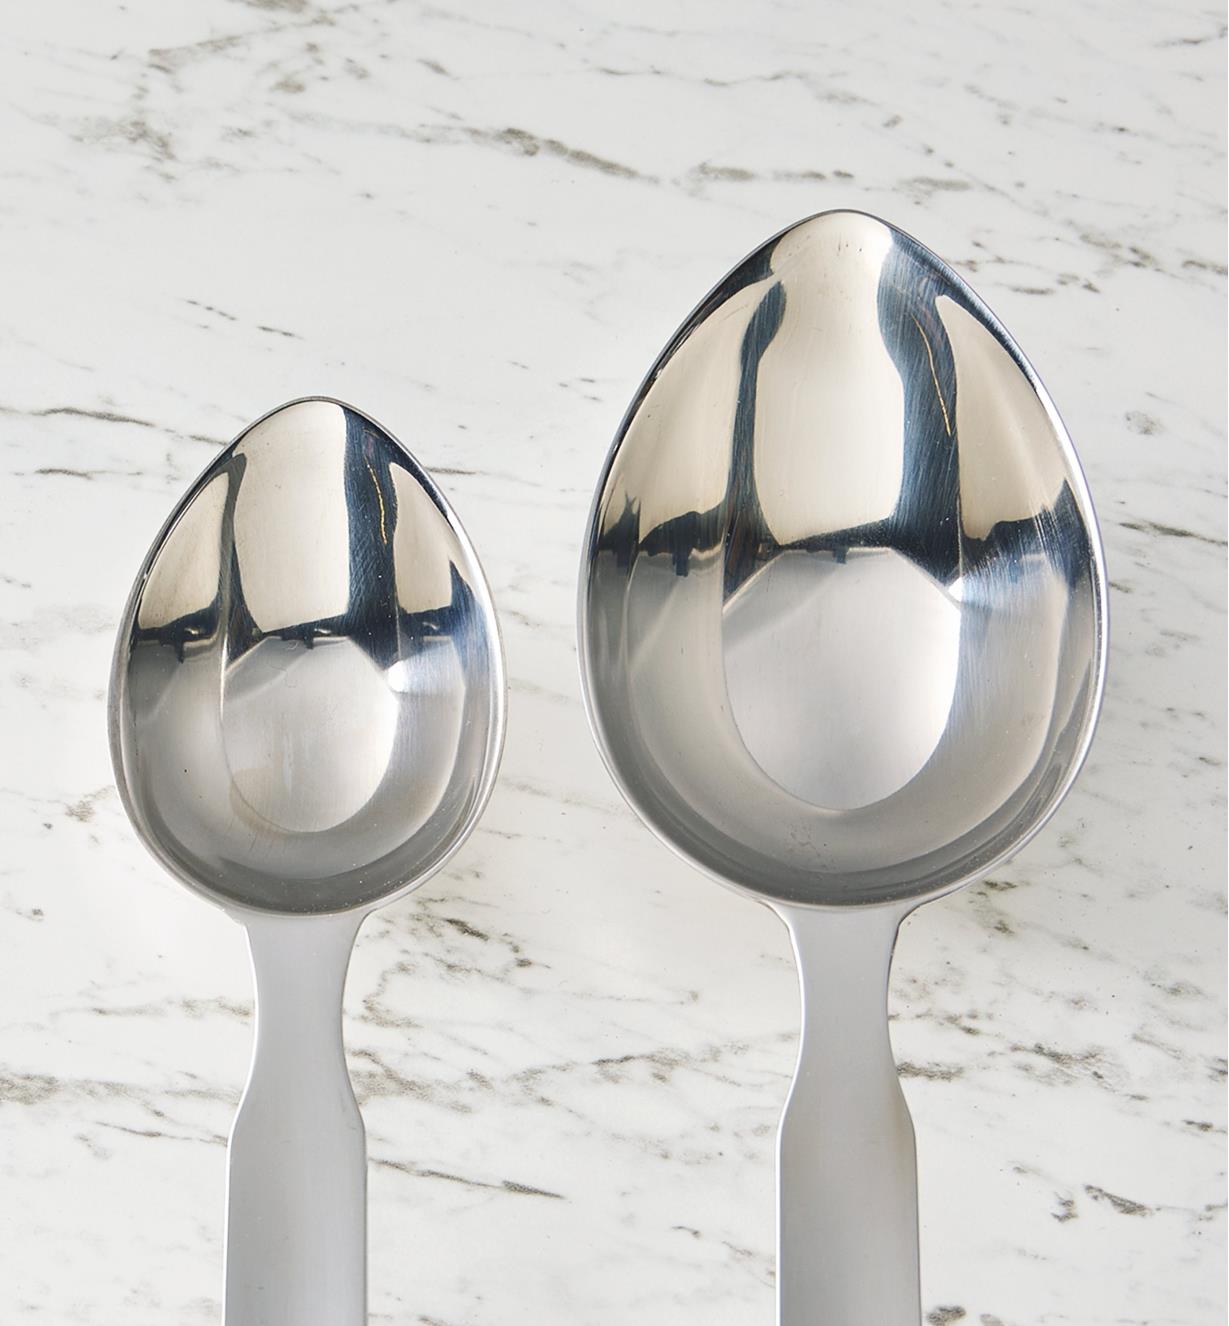 Two sizes of long-handled measuring scoop side by side